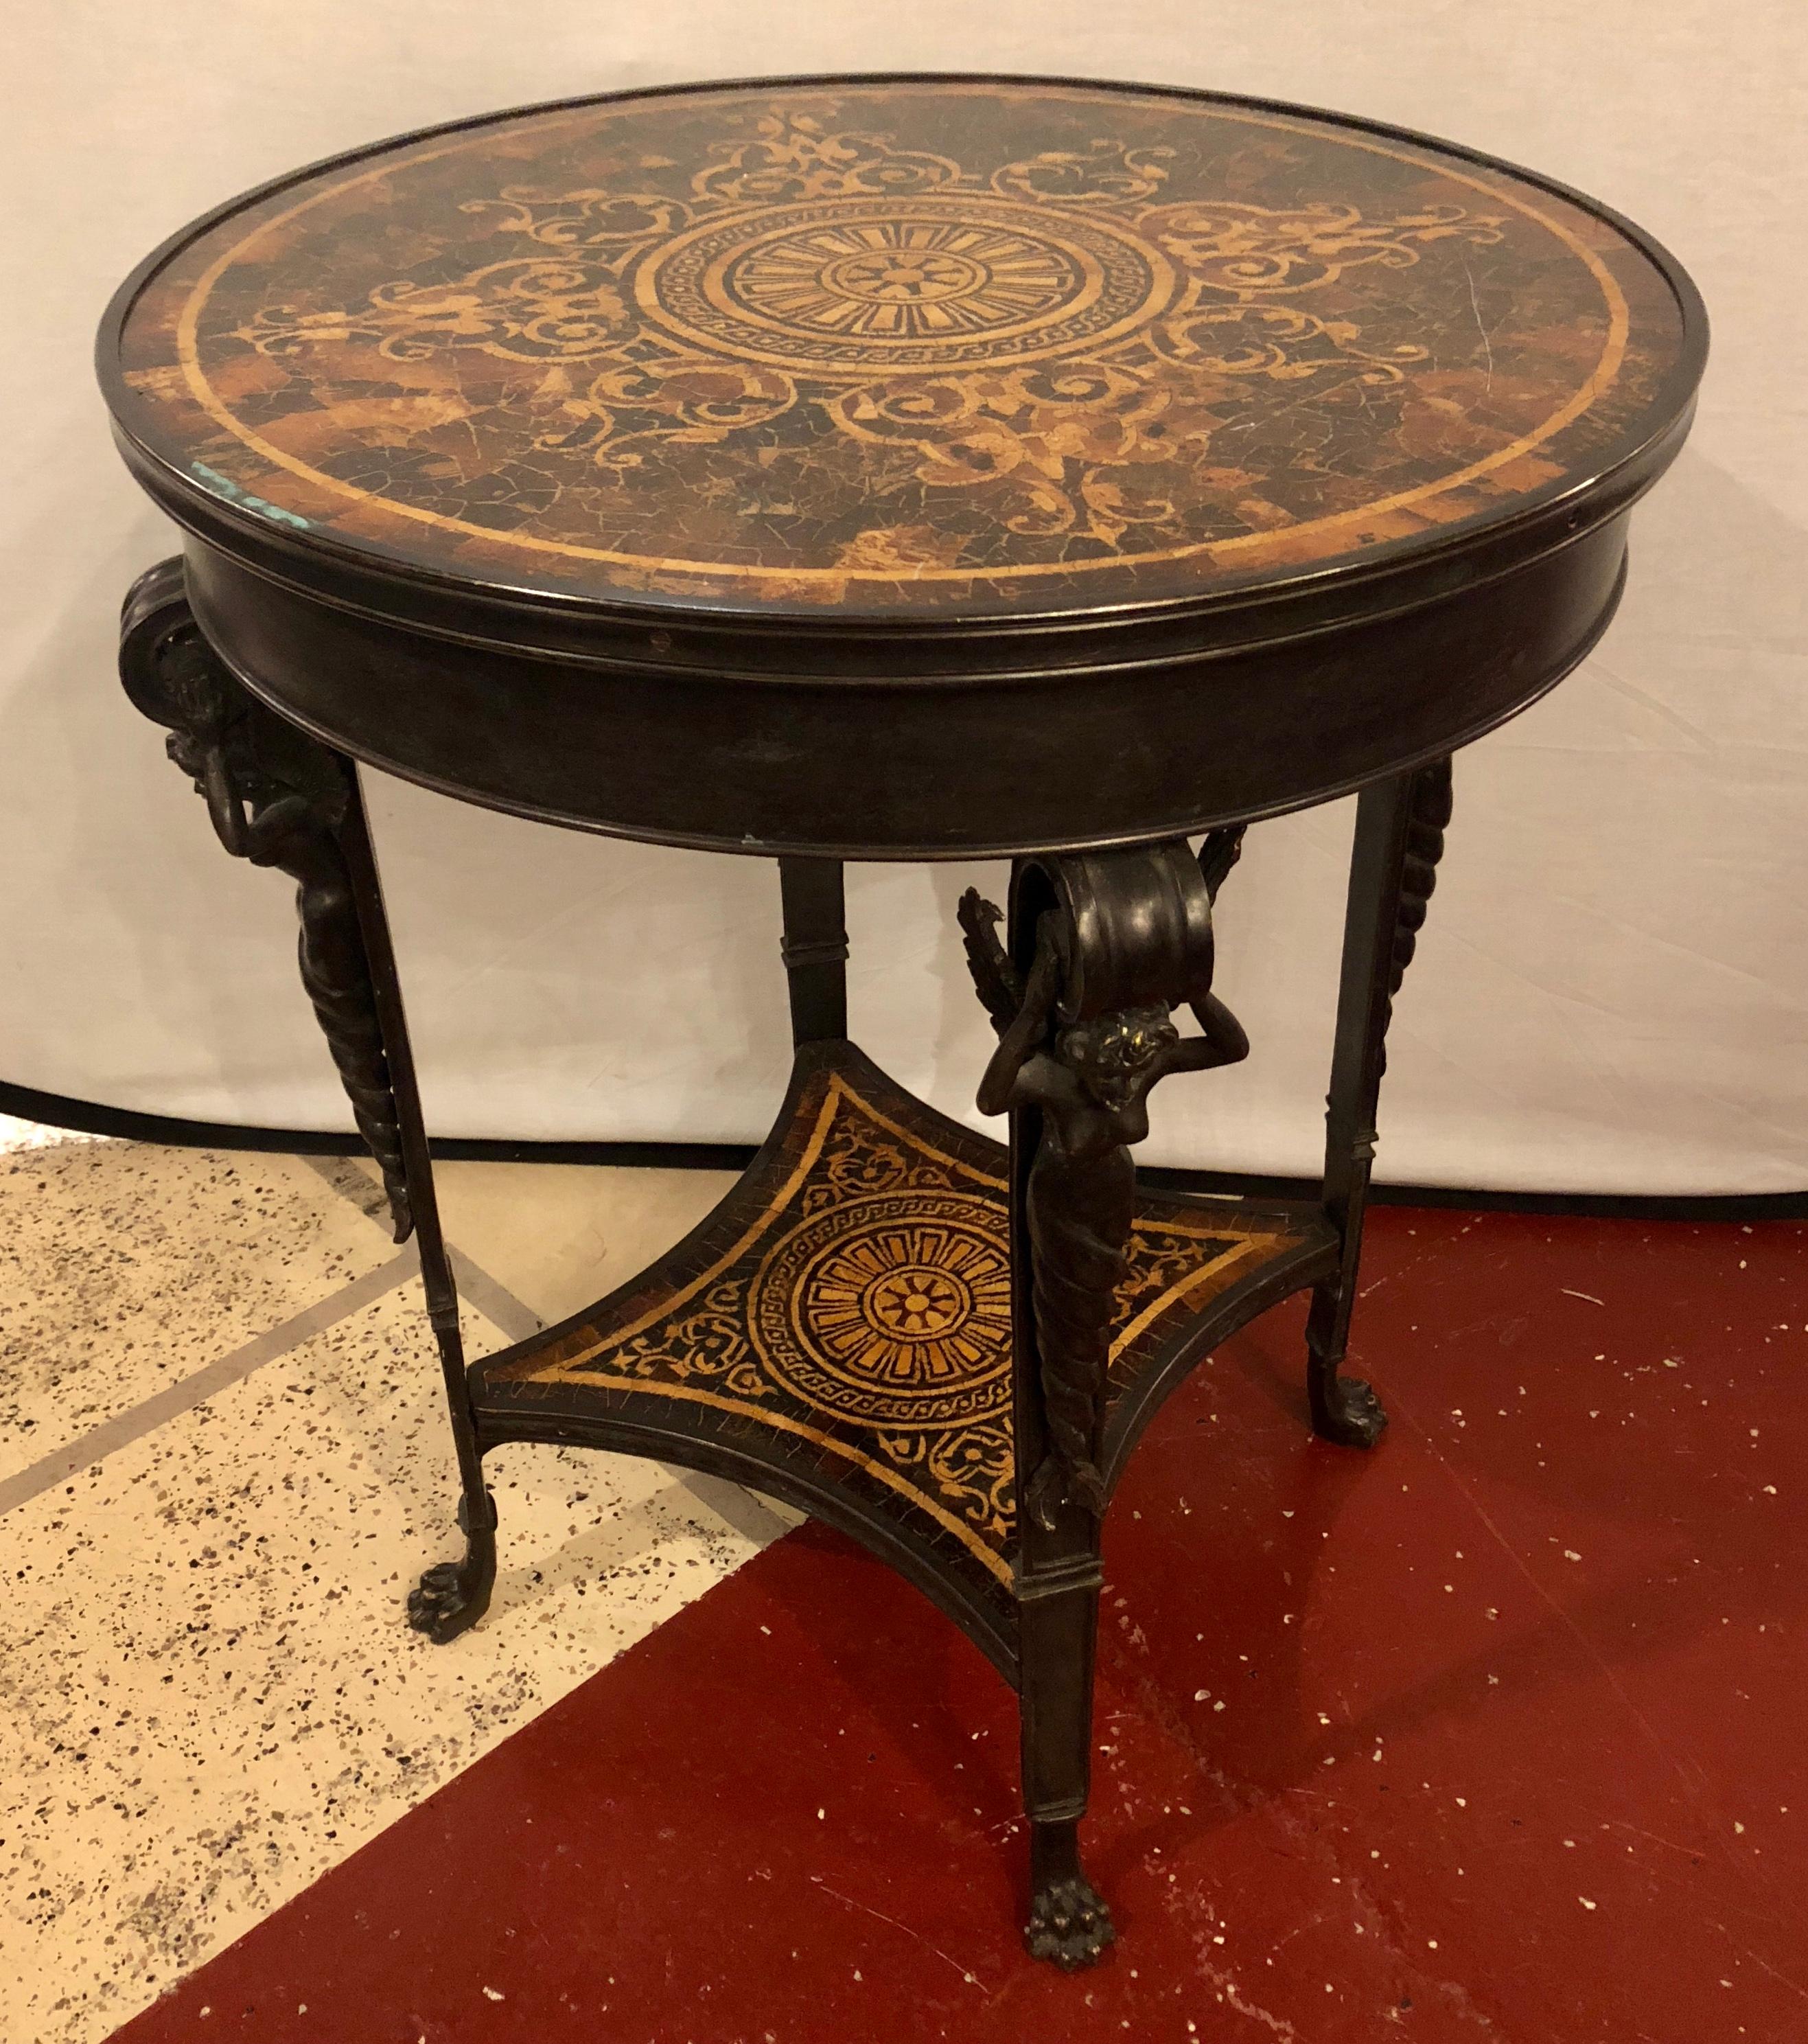 19th century tortoiseshell top bronze figural center or end lamp table. This one of a kind table has winged bronze figures on the corners supporting a tortoiseshell form tabletop. 

EXXX.